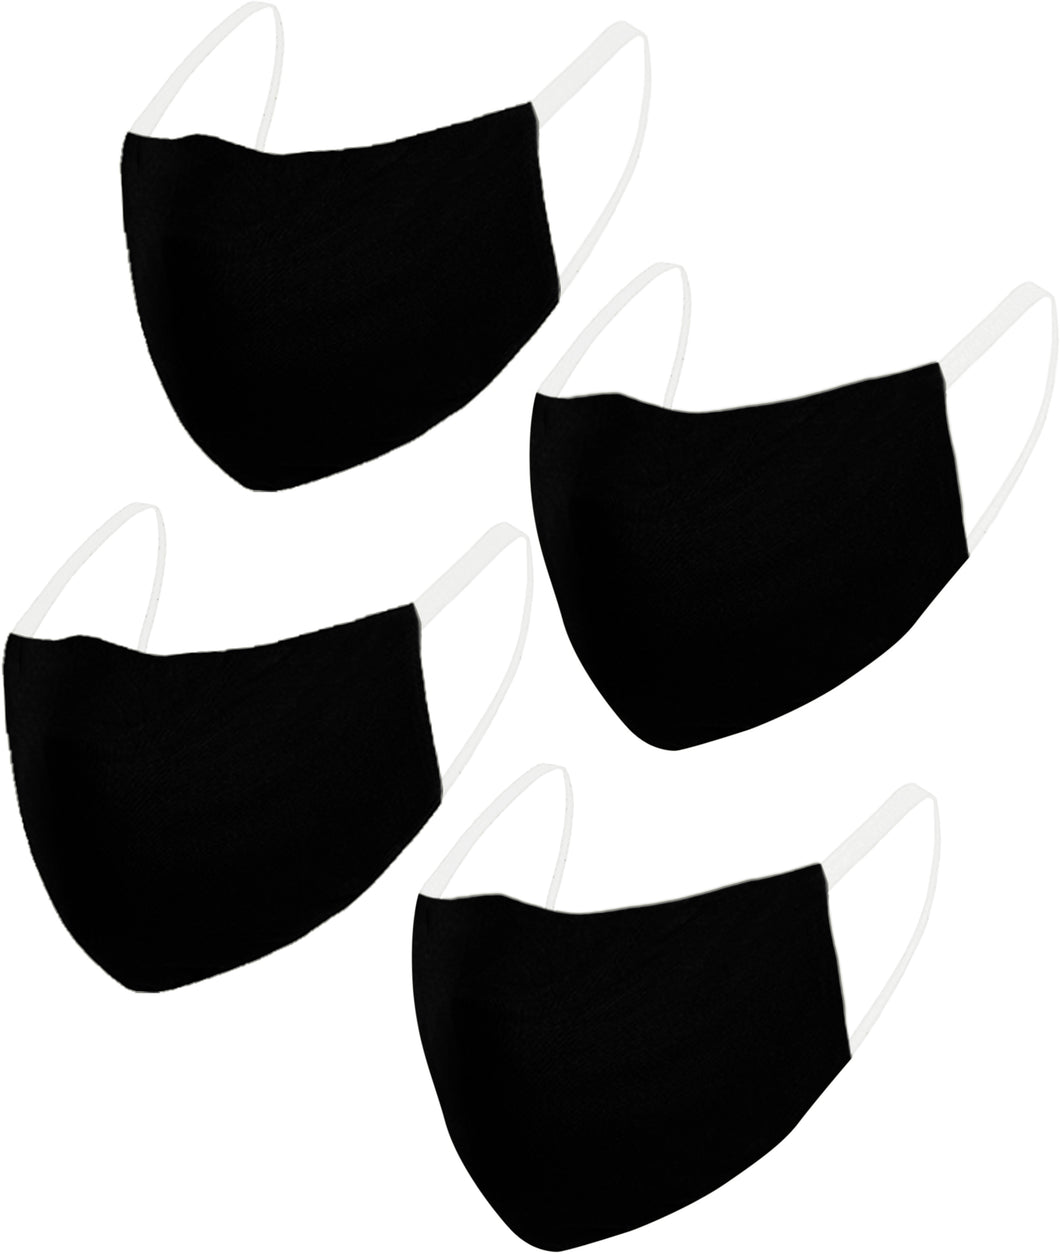 Pack of 4 AMERICAN SMALL BUSINESS LA LEELA Plain Unisex  Reusable Washable Face Mask Breathable Lightweight Dust Mouth Black_V828